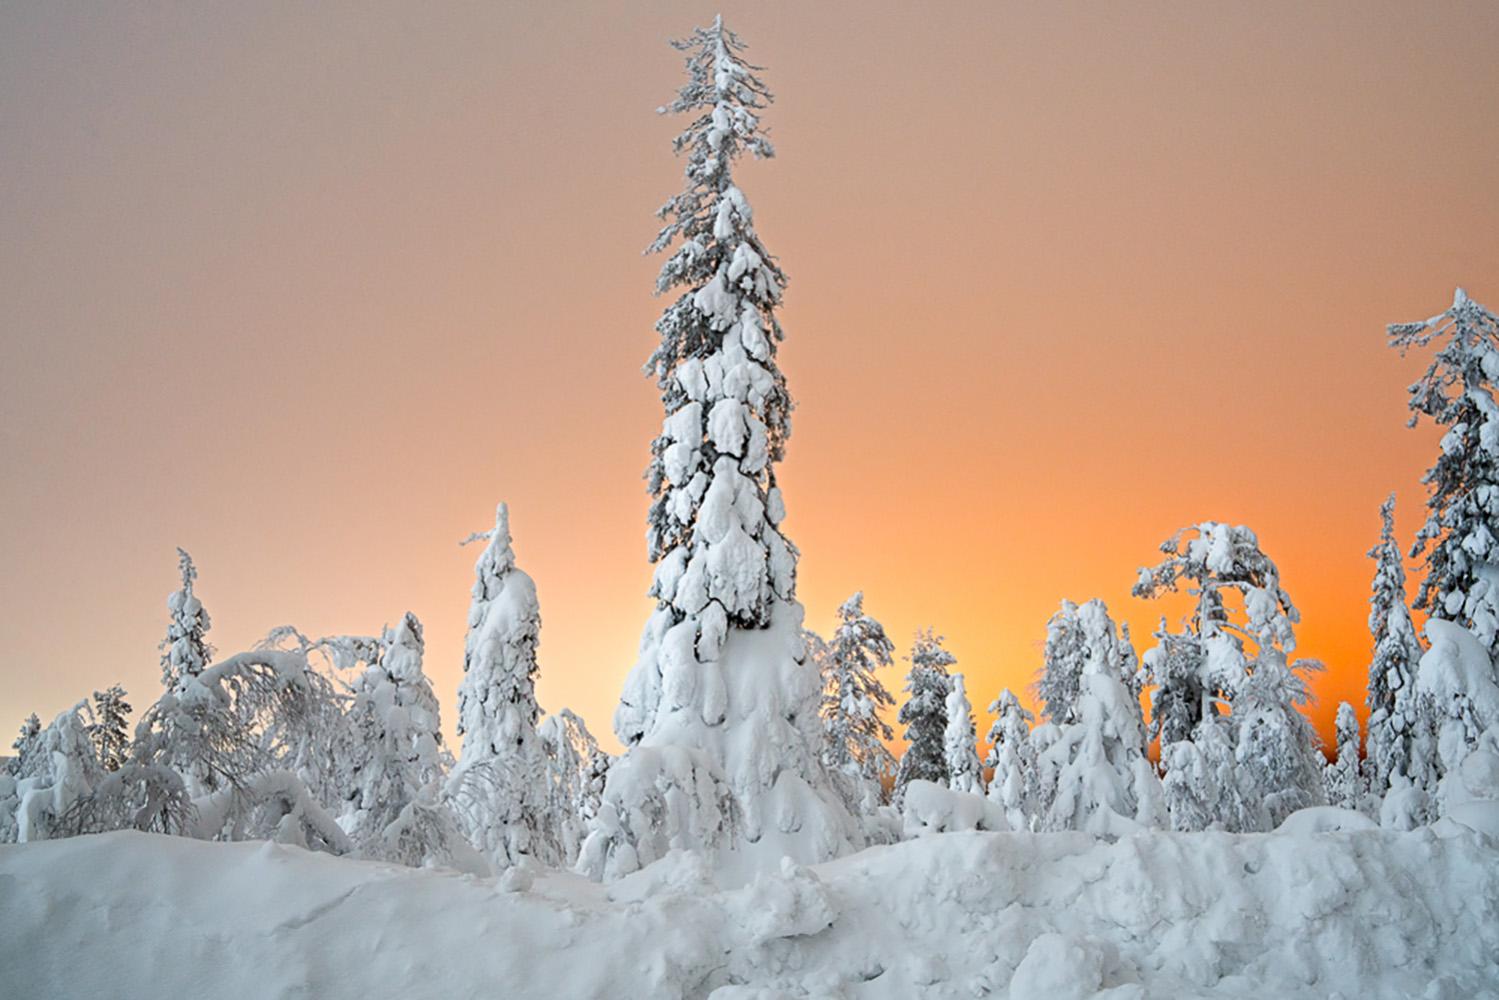 Pine Sunset by Luca Marziale - contemporary photography, snowy landscape